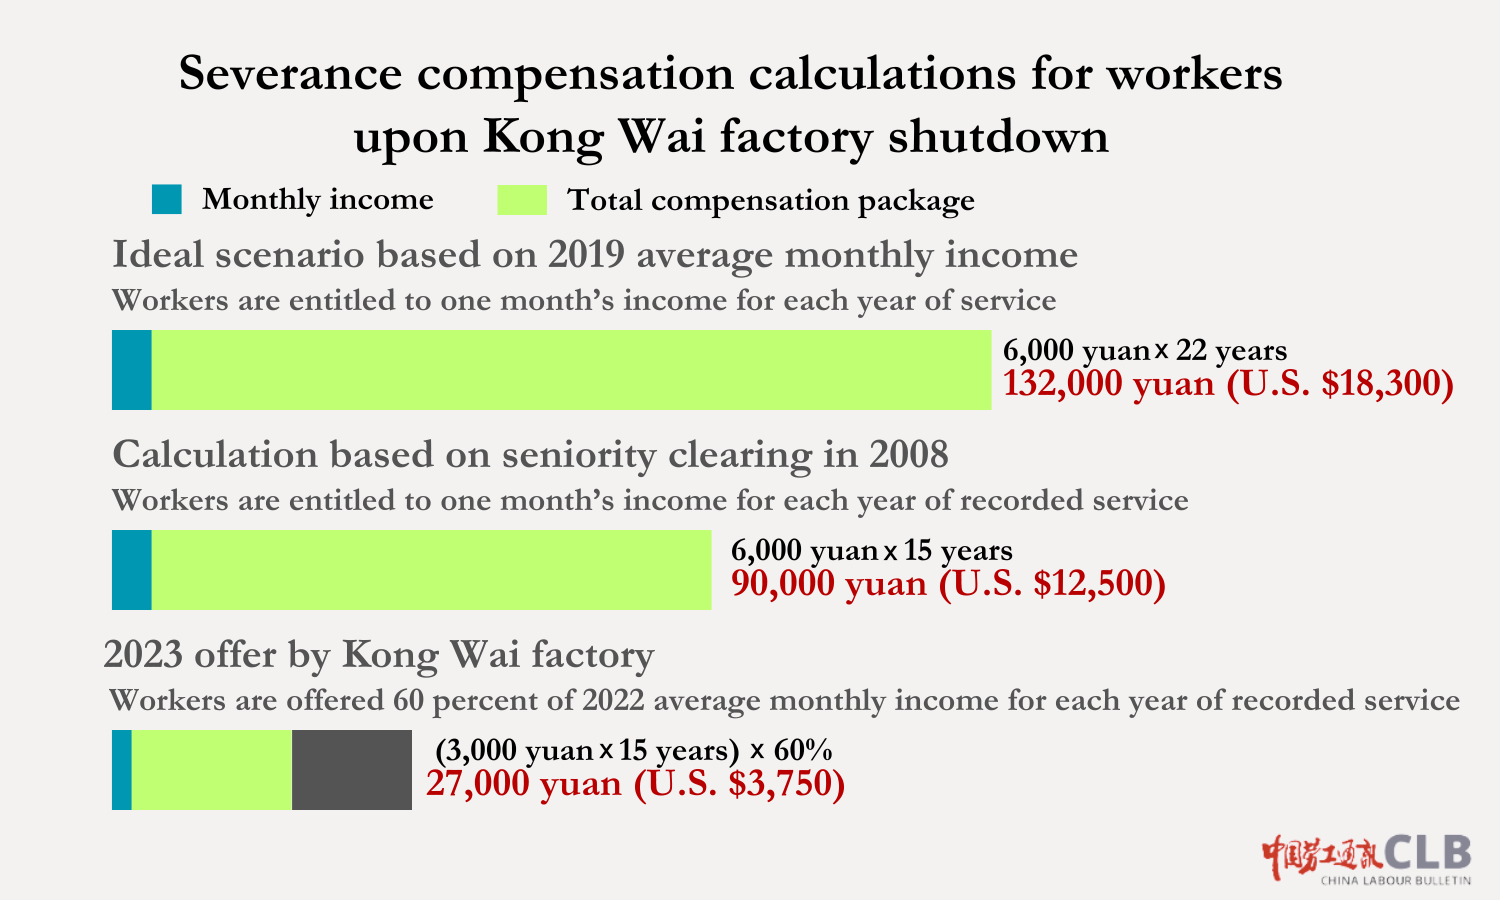 A CLB graphic shows hypothetical calculations for workers' severance based on a few different scenarios